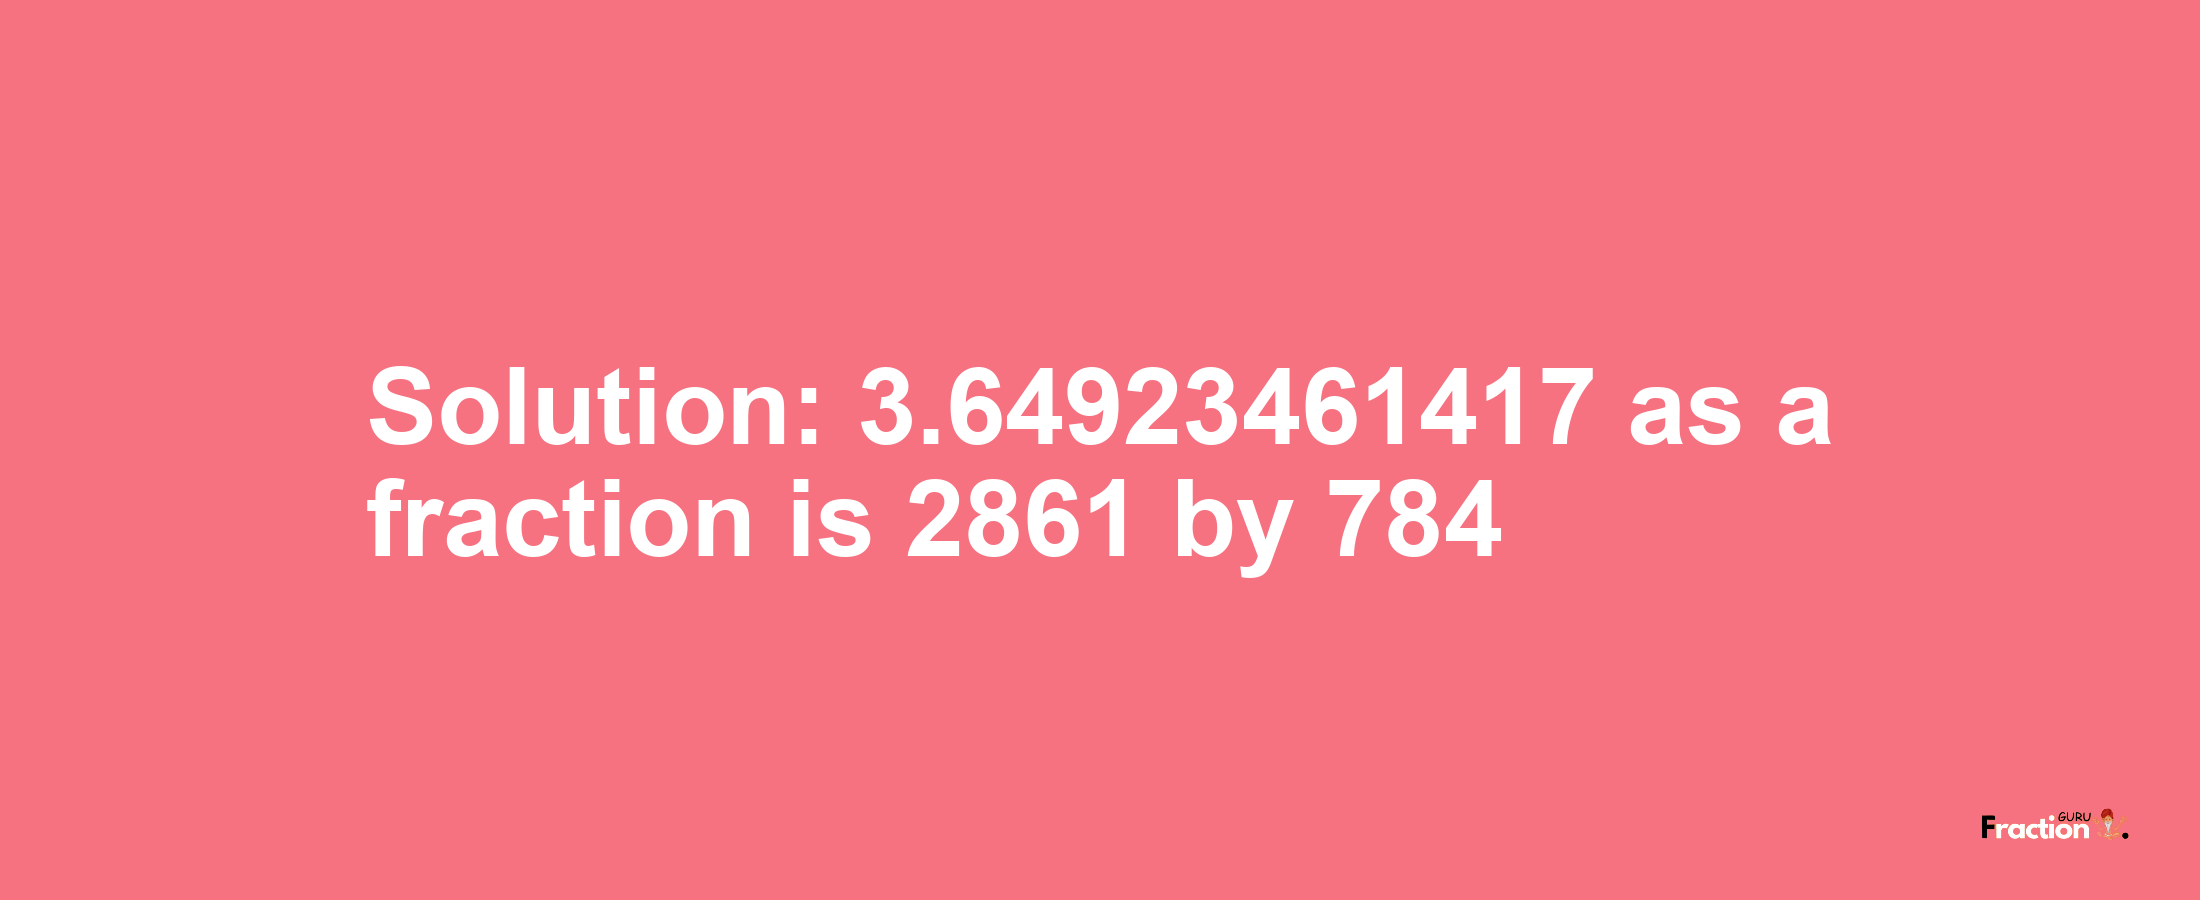 Solution:3.64923461417 as a fraction is 2861/784